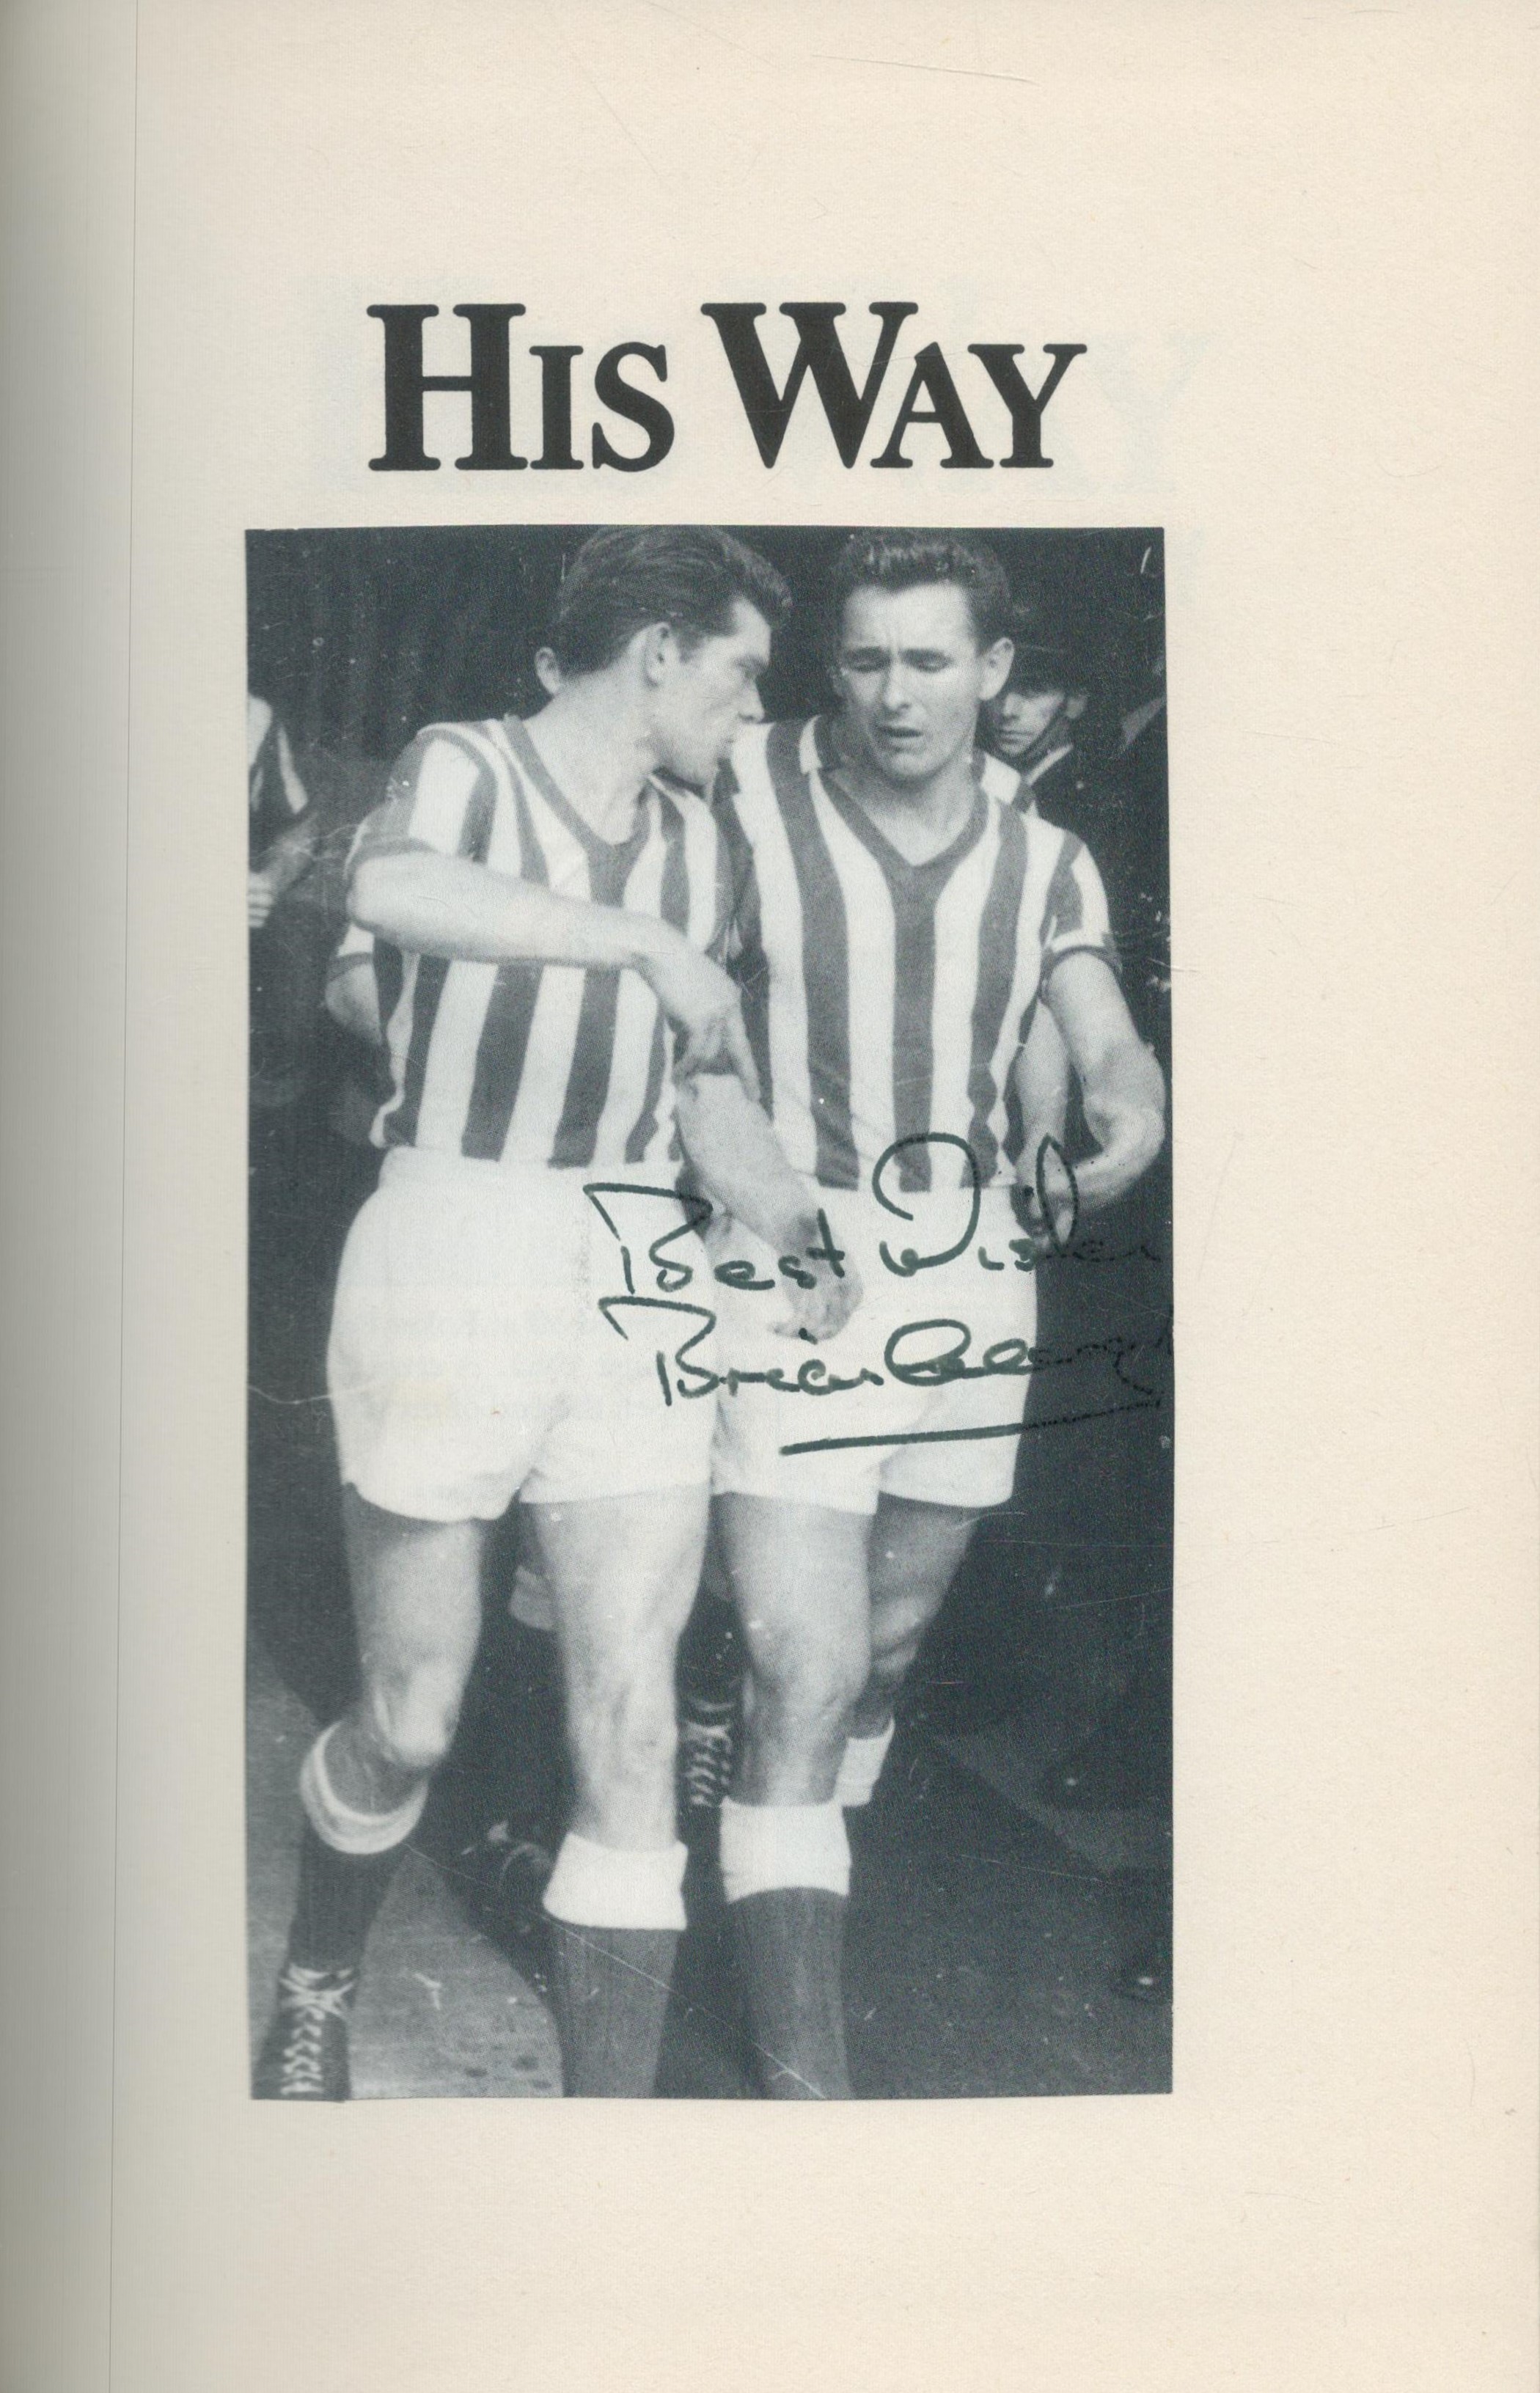 Brian Clough signed His Way - The Brian Clough story hardback book. Signed on inside title page. - Image 2 of 3